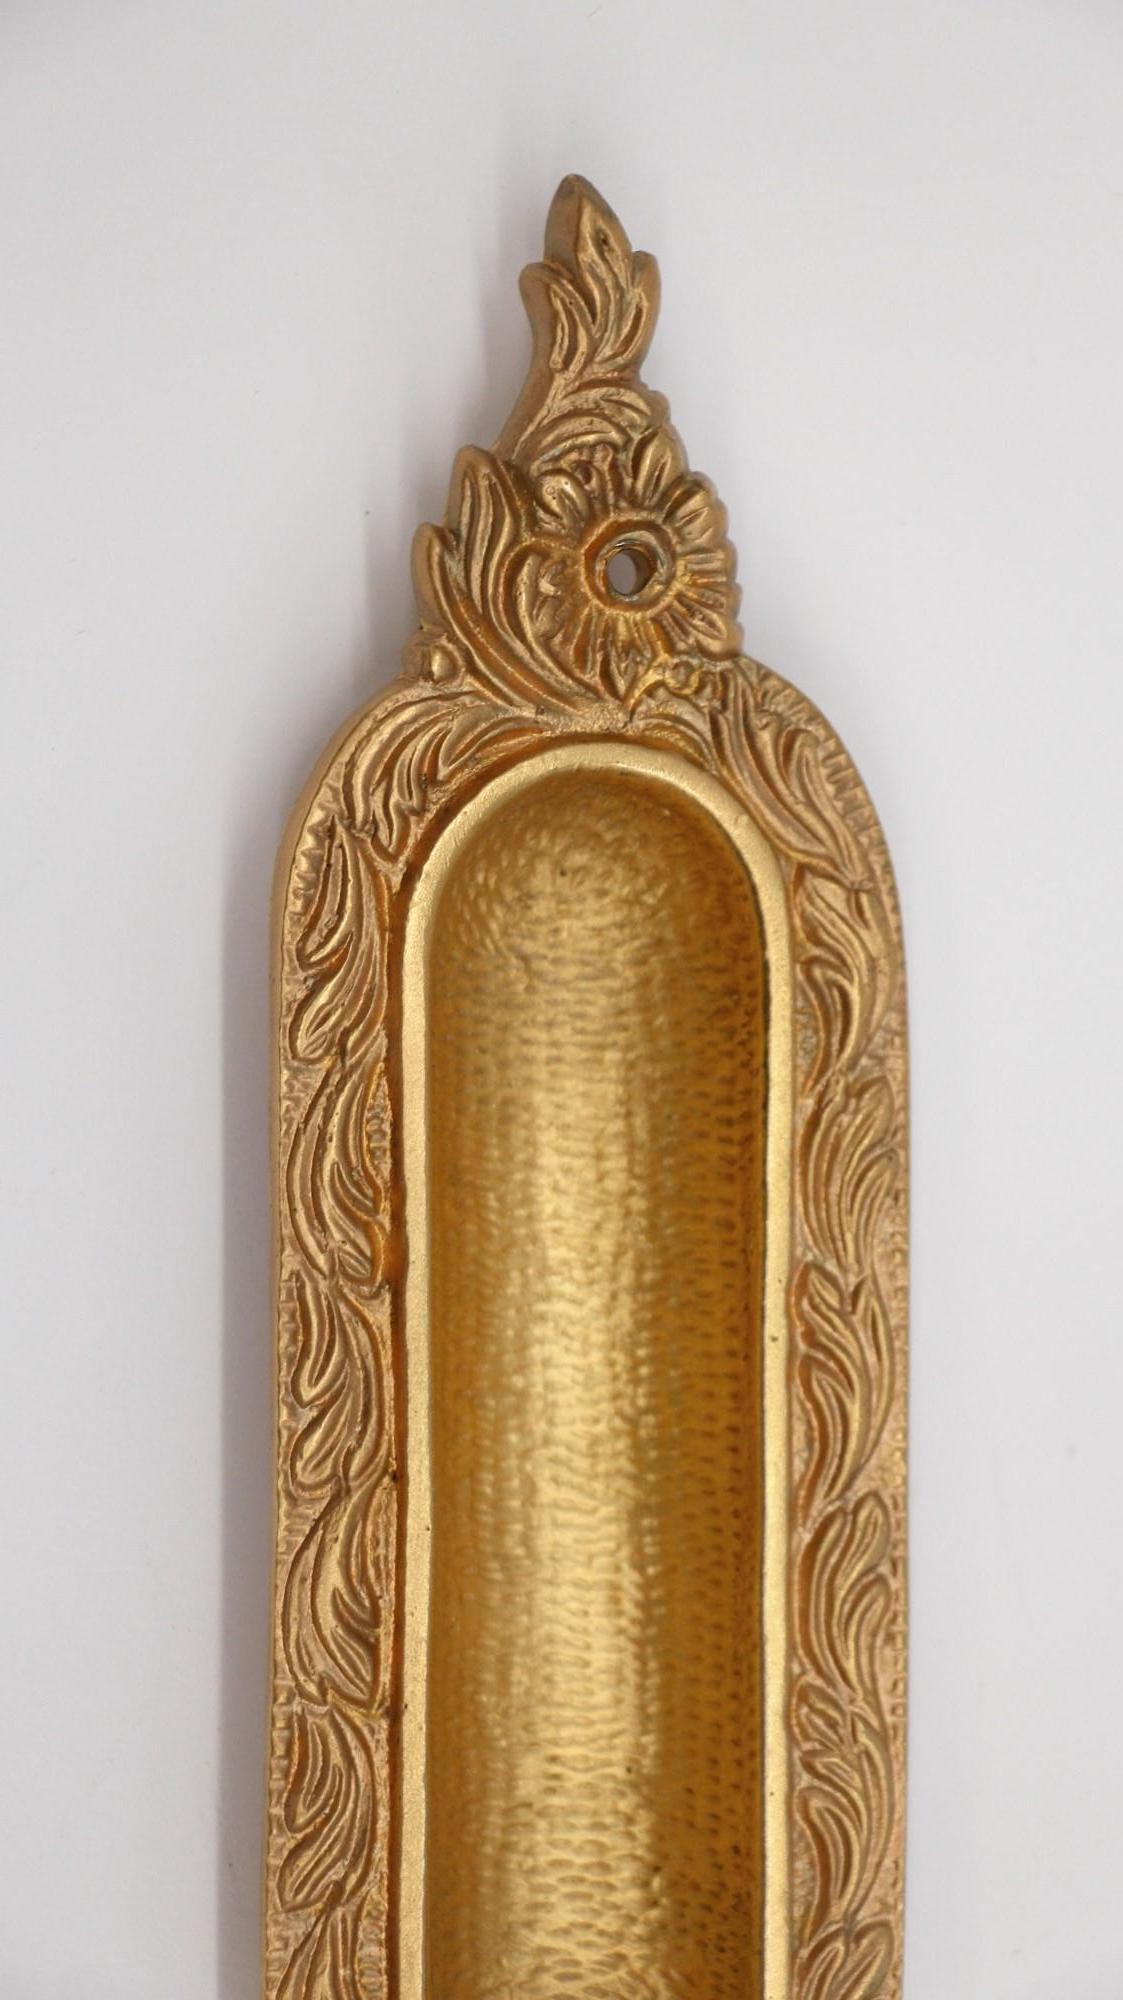 Italian Salice Paolo pocket door pulls, brass with a gold finish, 7.5 in. wide. Sold as a pair. High quality recessed pulls imported from Italy. Priced per pair. This can be seen at our 400 Gilligan St location in Scranton, PA.

 